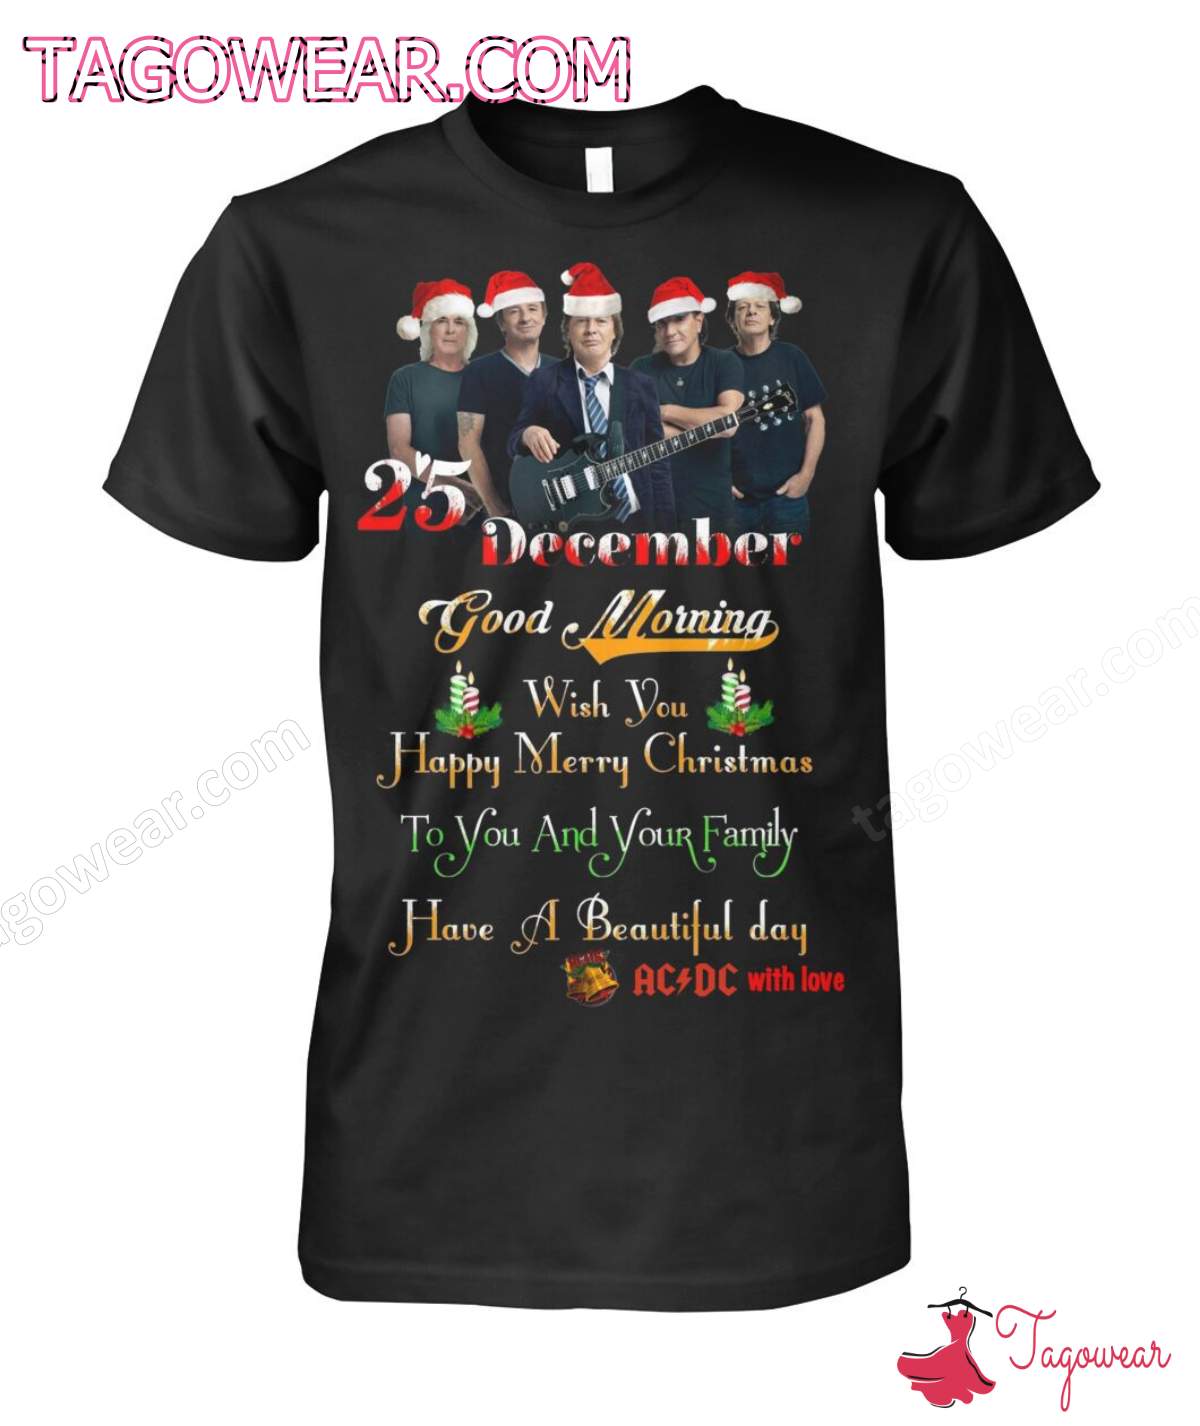 25 December Good Morning Wish You Happy Merry Christmas Ac Dc With Love Shirt a